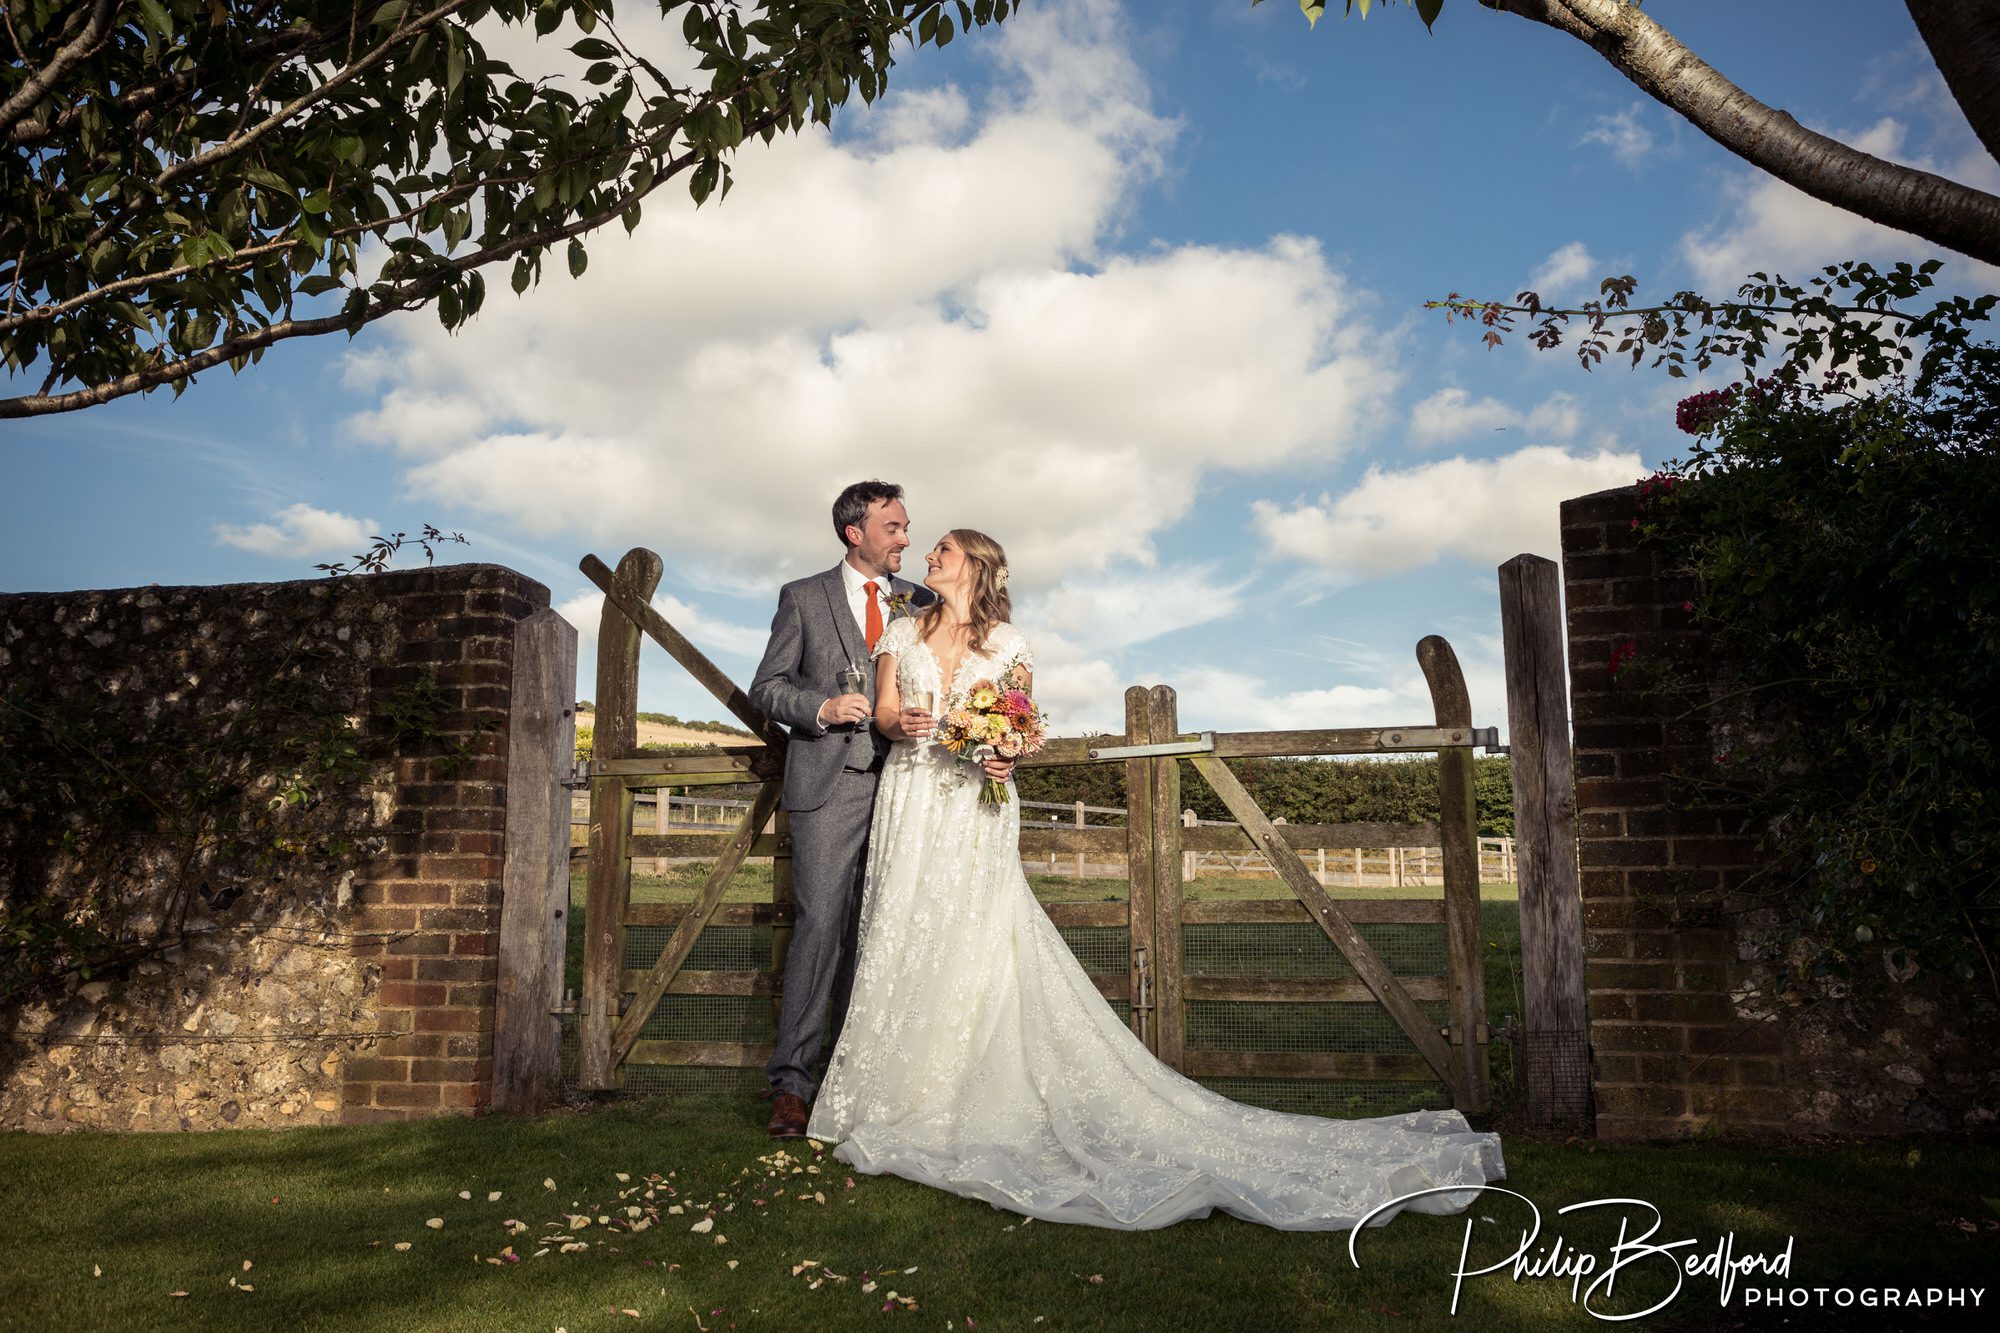 The bride and groom in front of a country side gate at A Pangdean Barn Wedding